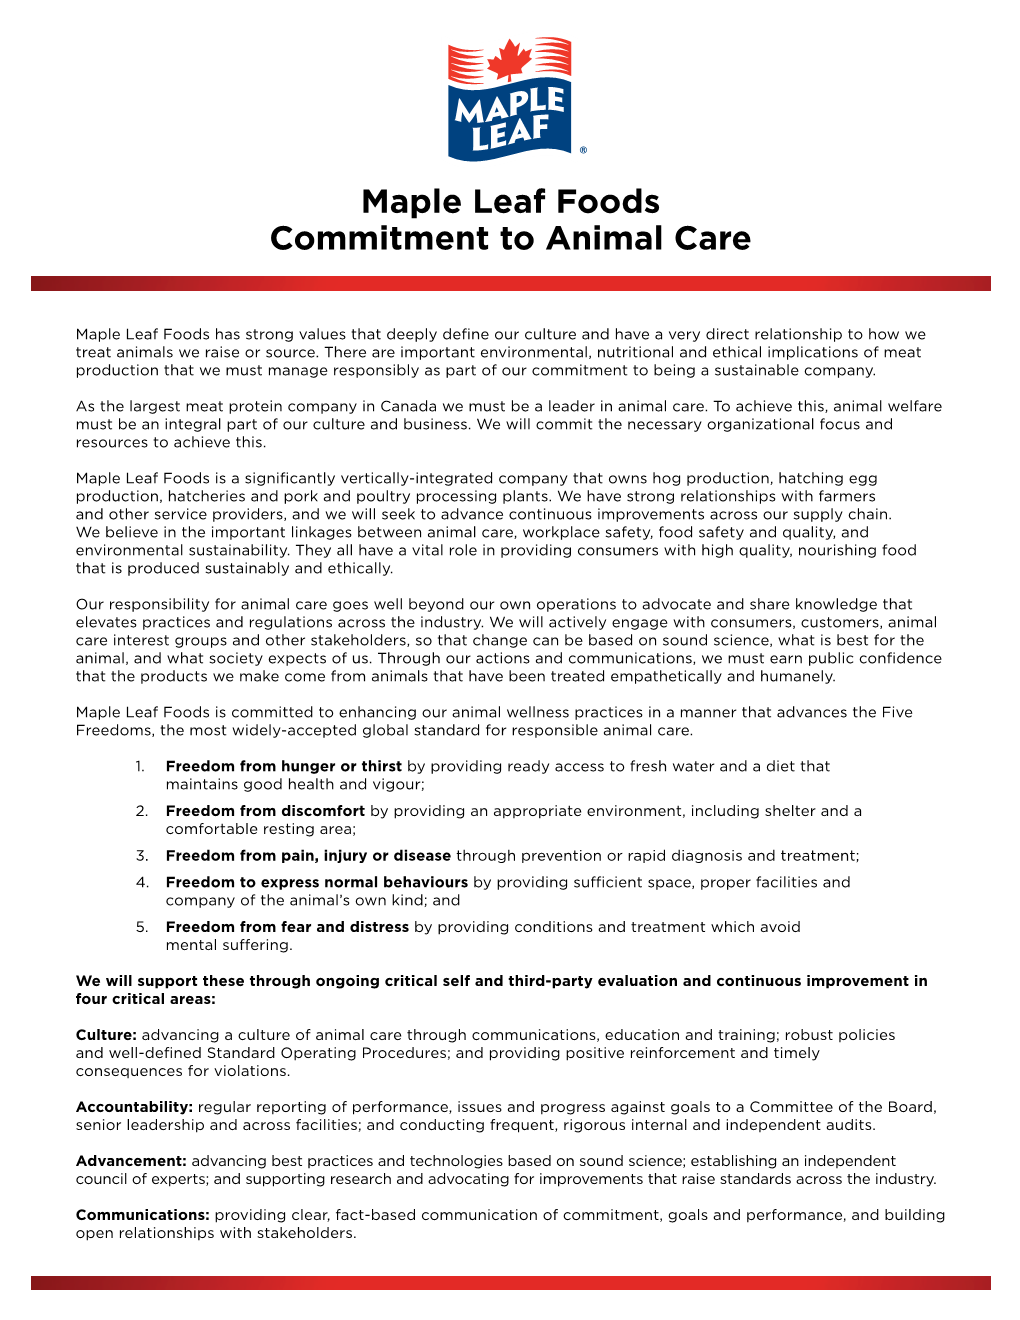 Maple Leaf Foods Commitment to Animal Care